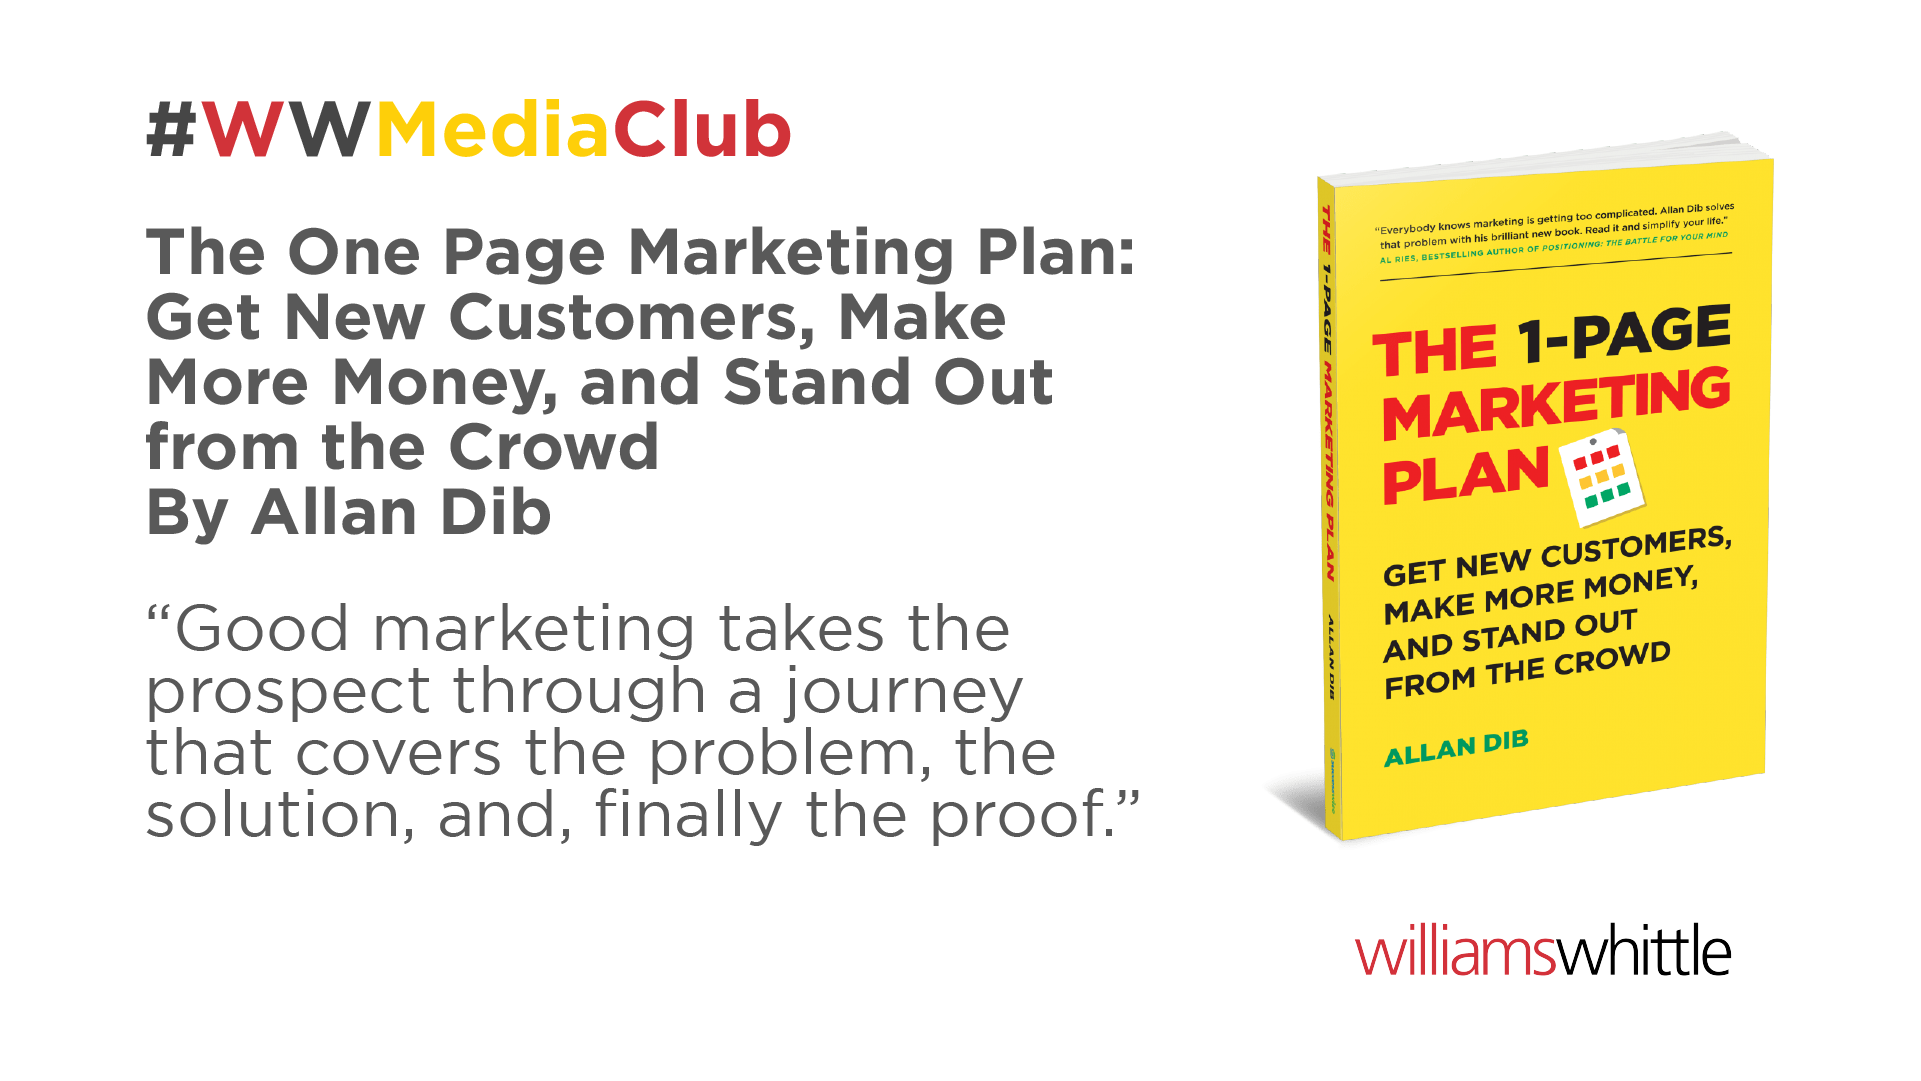 The One Page Marketing Plan: Get New Customers, Make More Money, and Stand Out from the Crowd